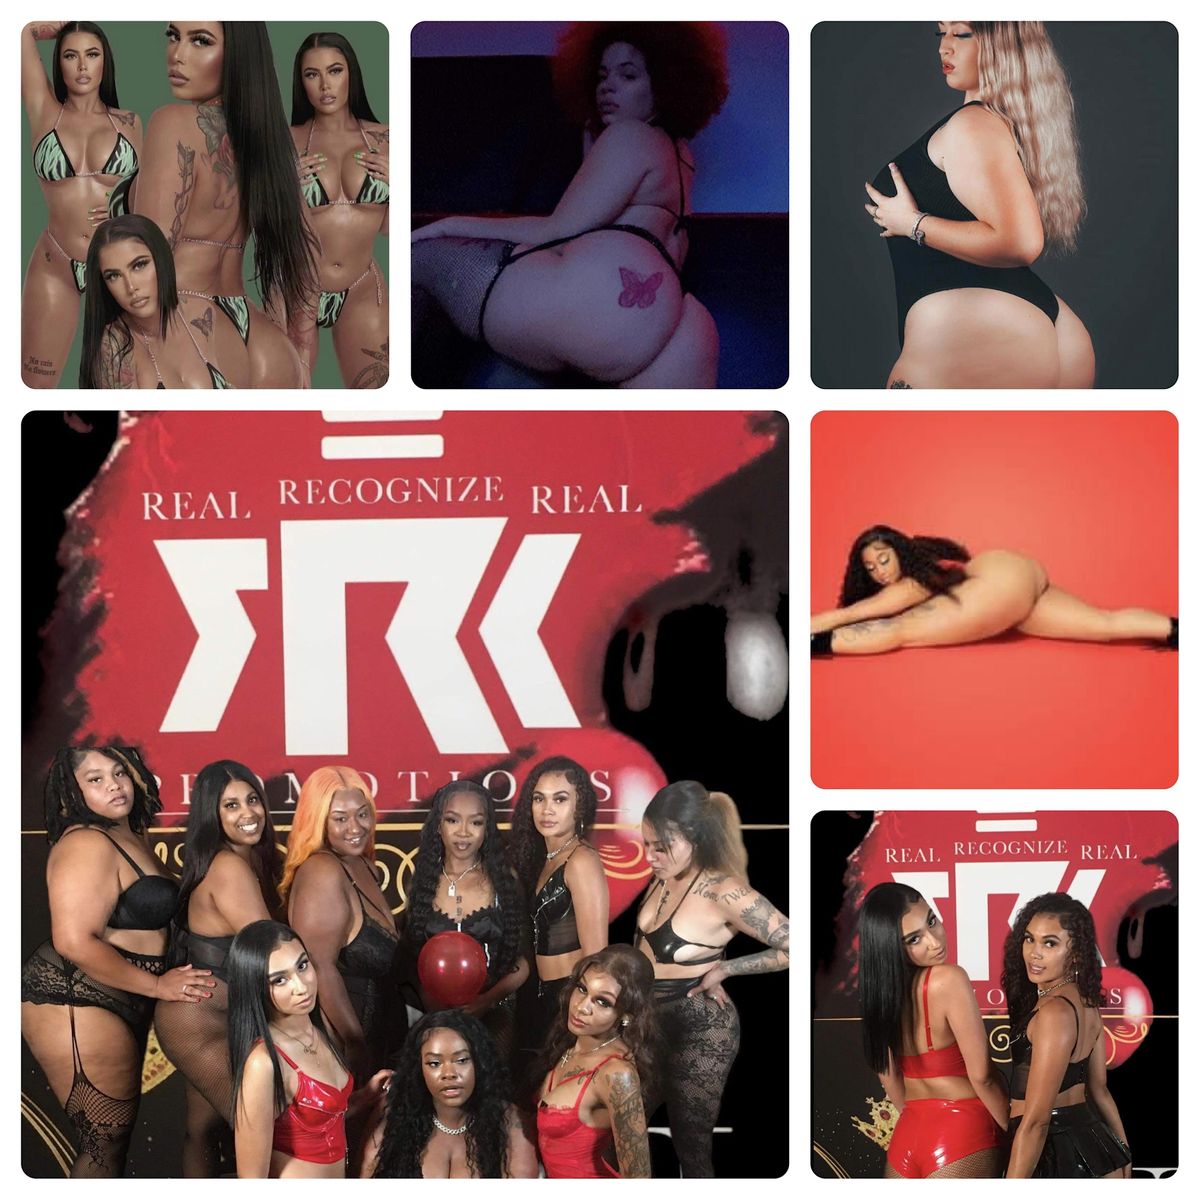 \u201cFreaky Fridays\u201d The Number One Place for Adult Entertainment